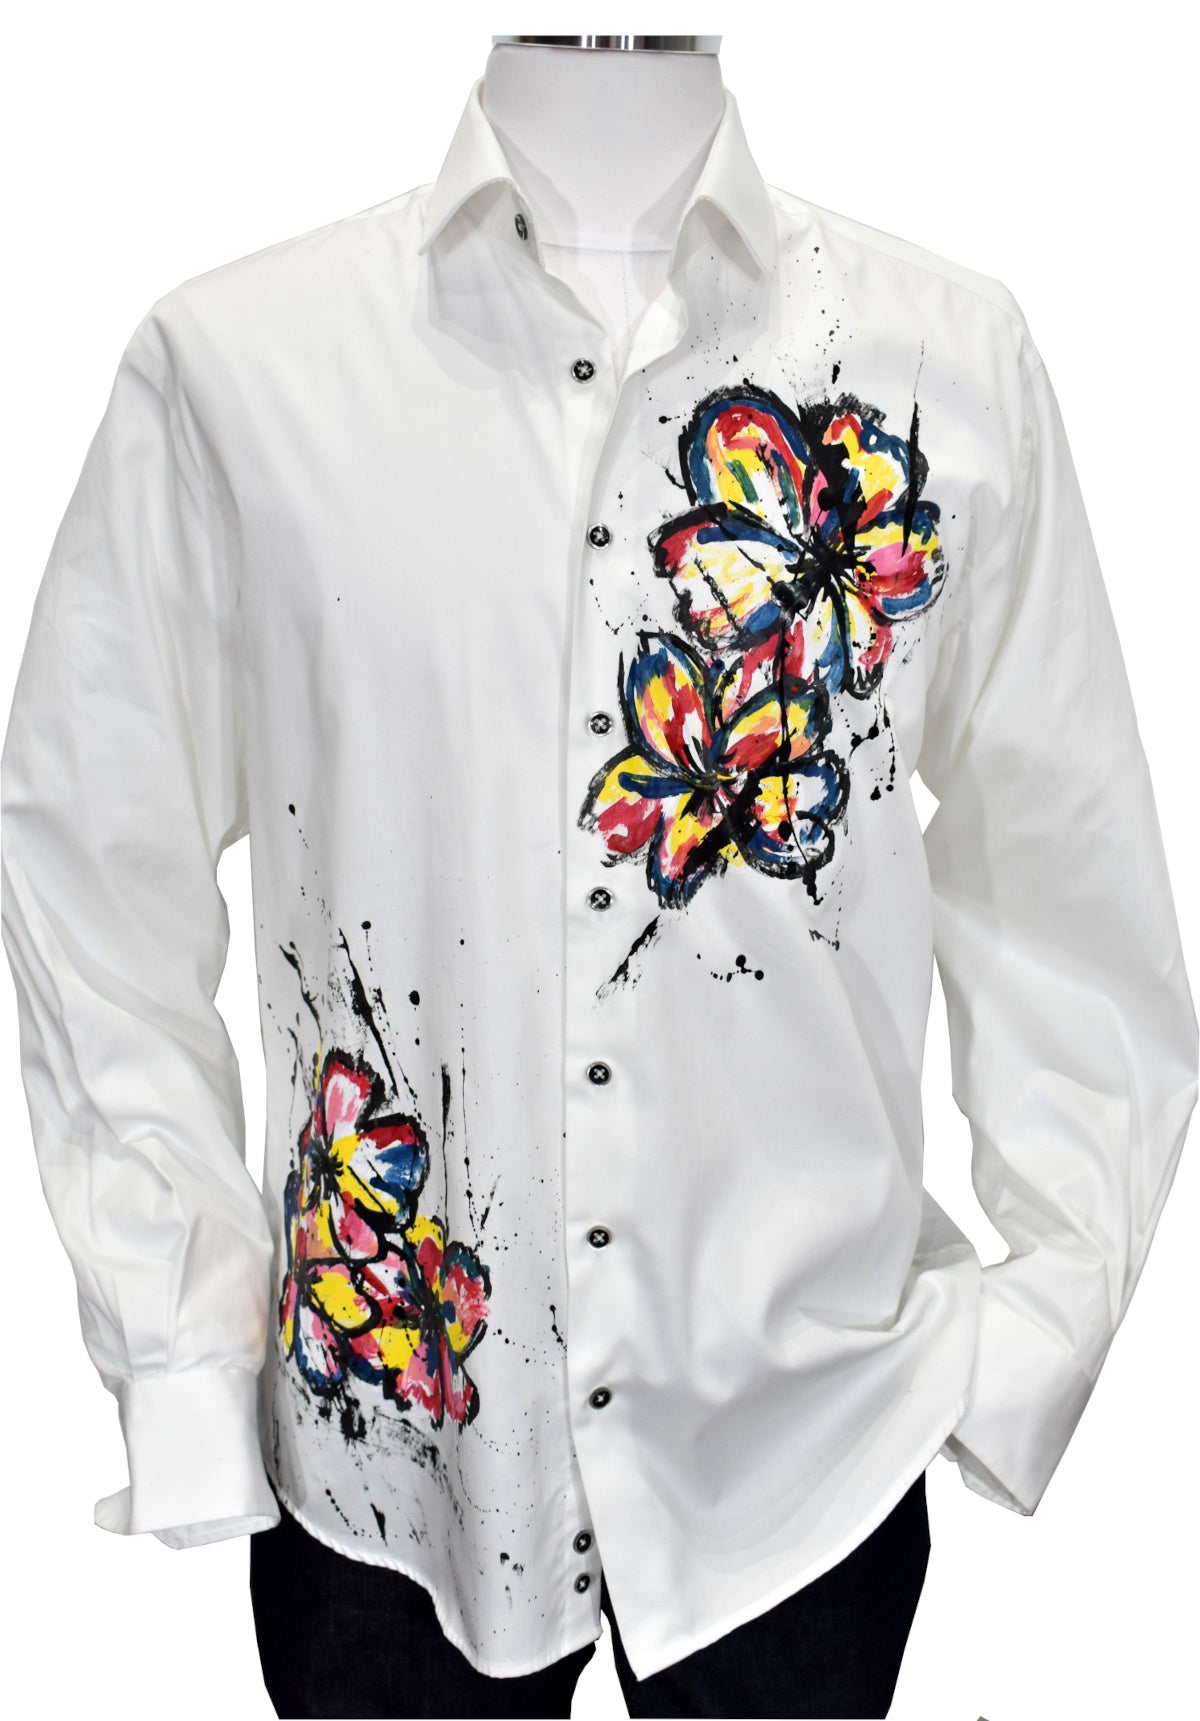 With style and uniqueness in mind, the hand painted shirts by Marcello are exclusively one of a kind.  Each one is artist hand painted, so no two are exactly alike.  Hand painted on soft cotton sateen fabric, along with custom detailing.  Soft cotton sateen fabric.  Custom stitch and button detailing.  Classic shaped fit, perfect for a medium build. Hand painted shirt by Marcello Sport.